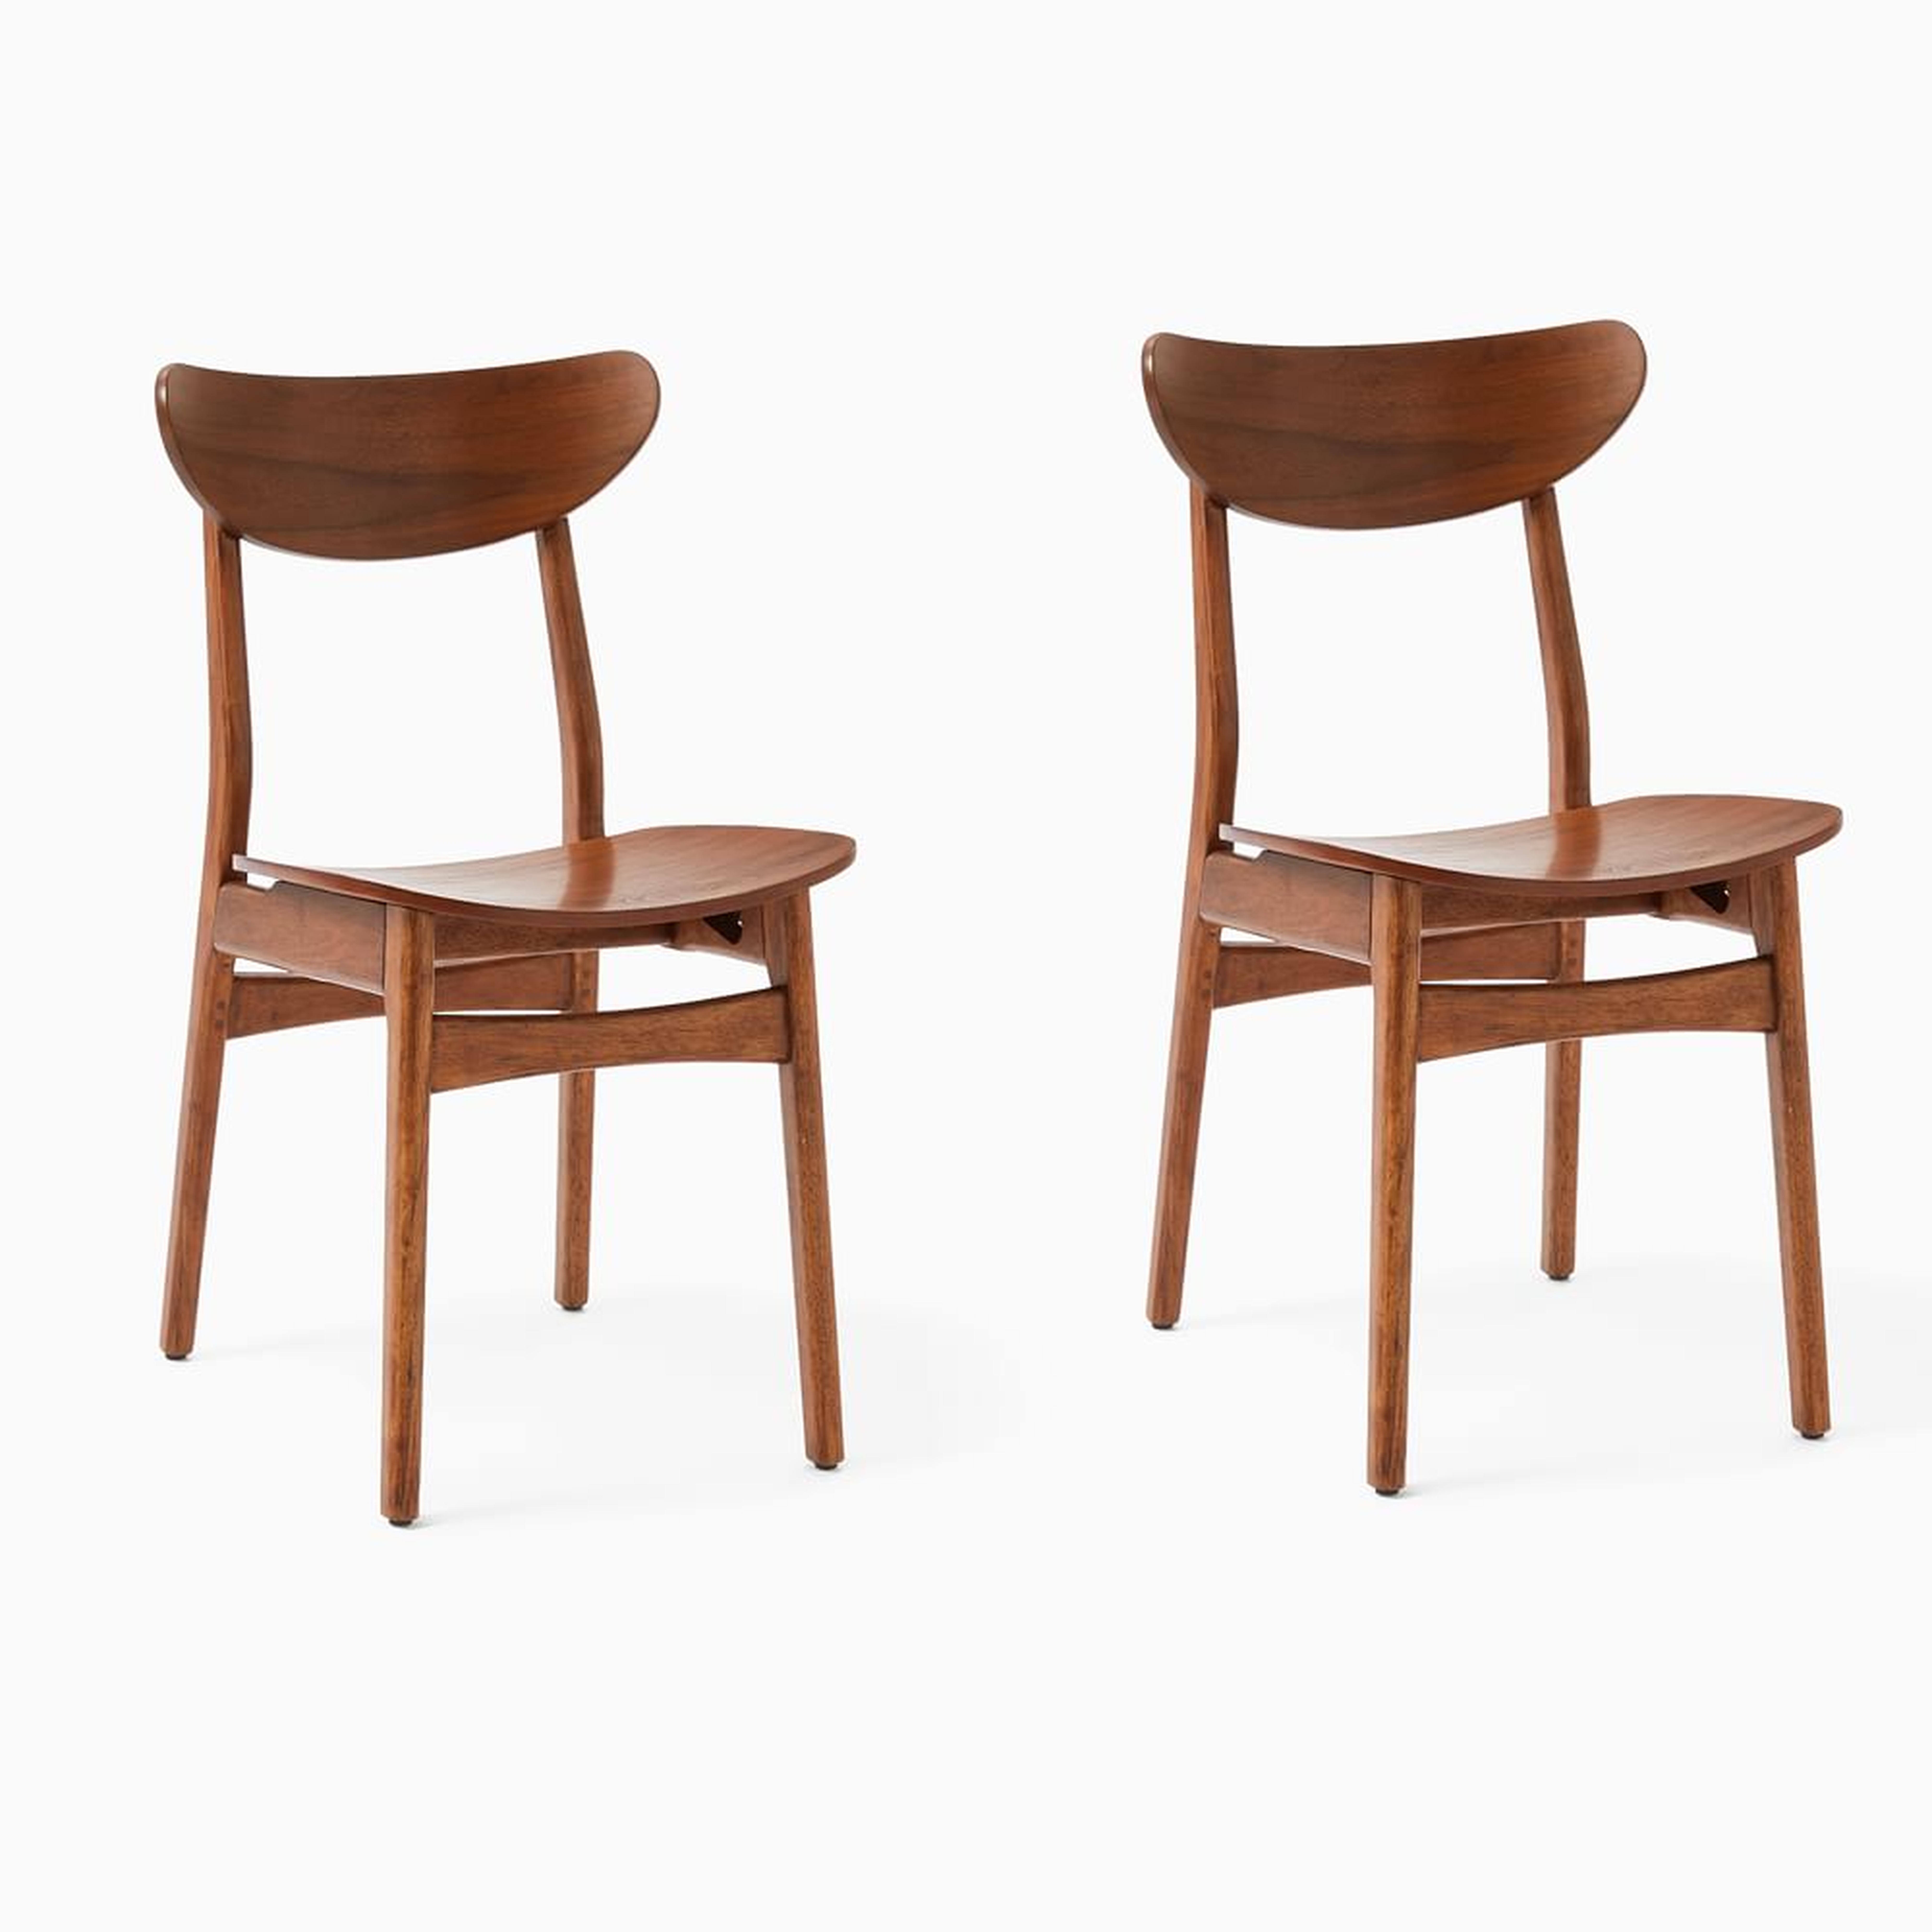 Classic Cafe Wood Dining Chair, Walnut, Set of 2 - West Elm